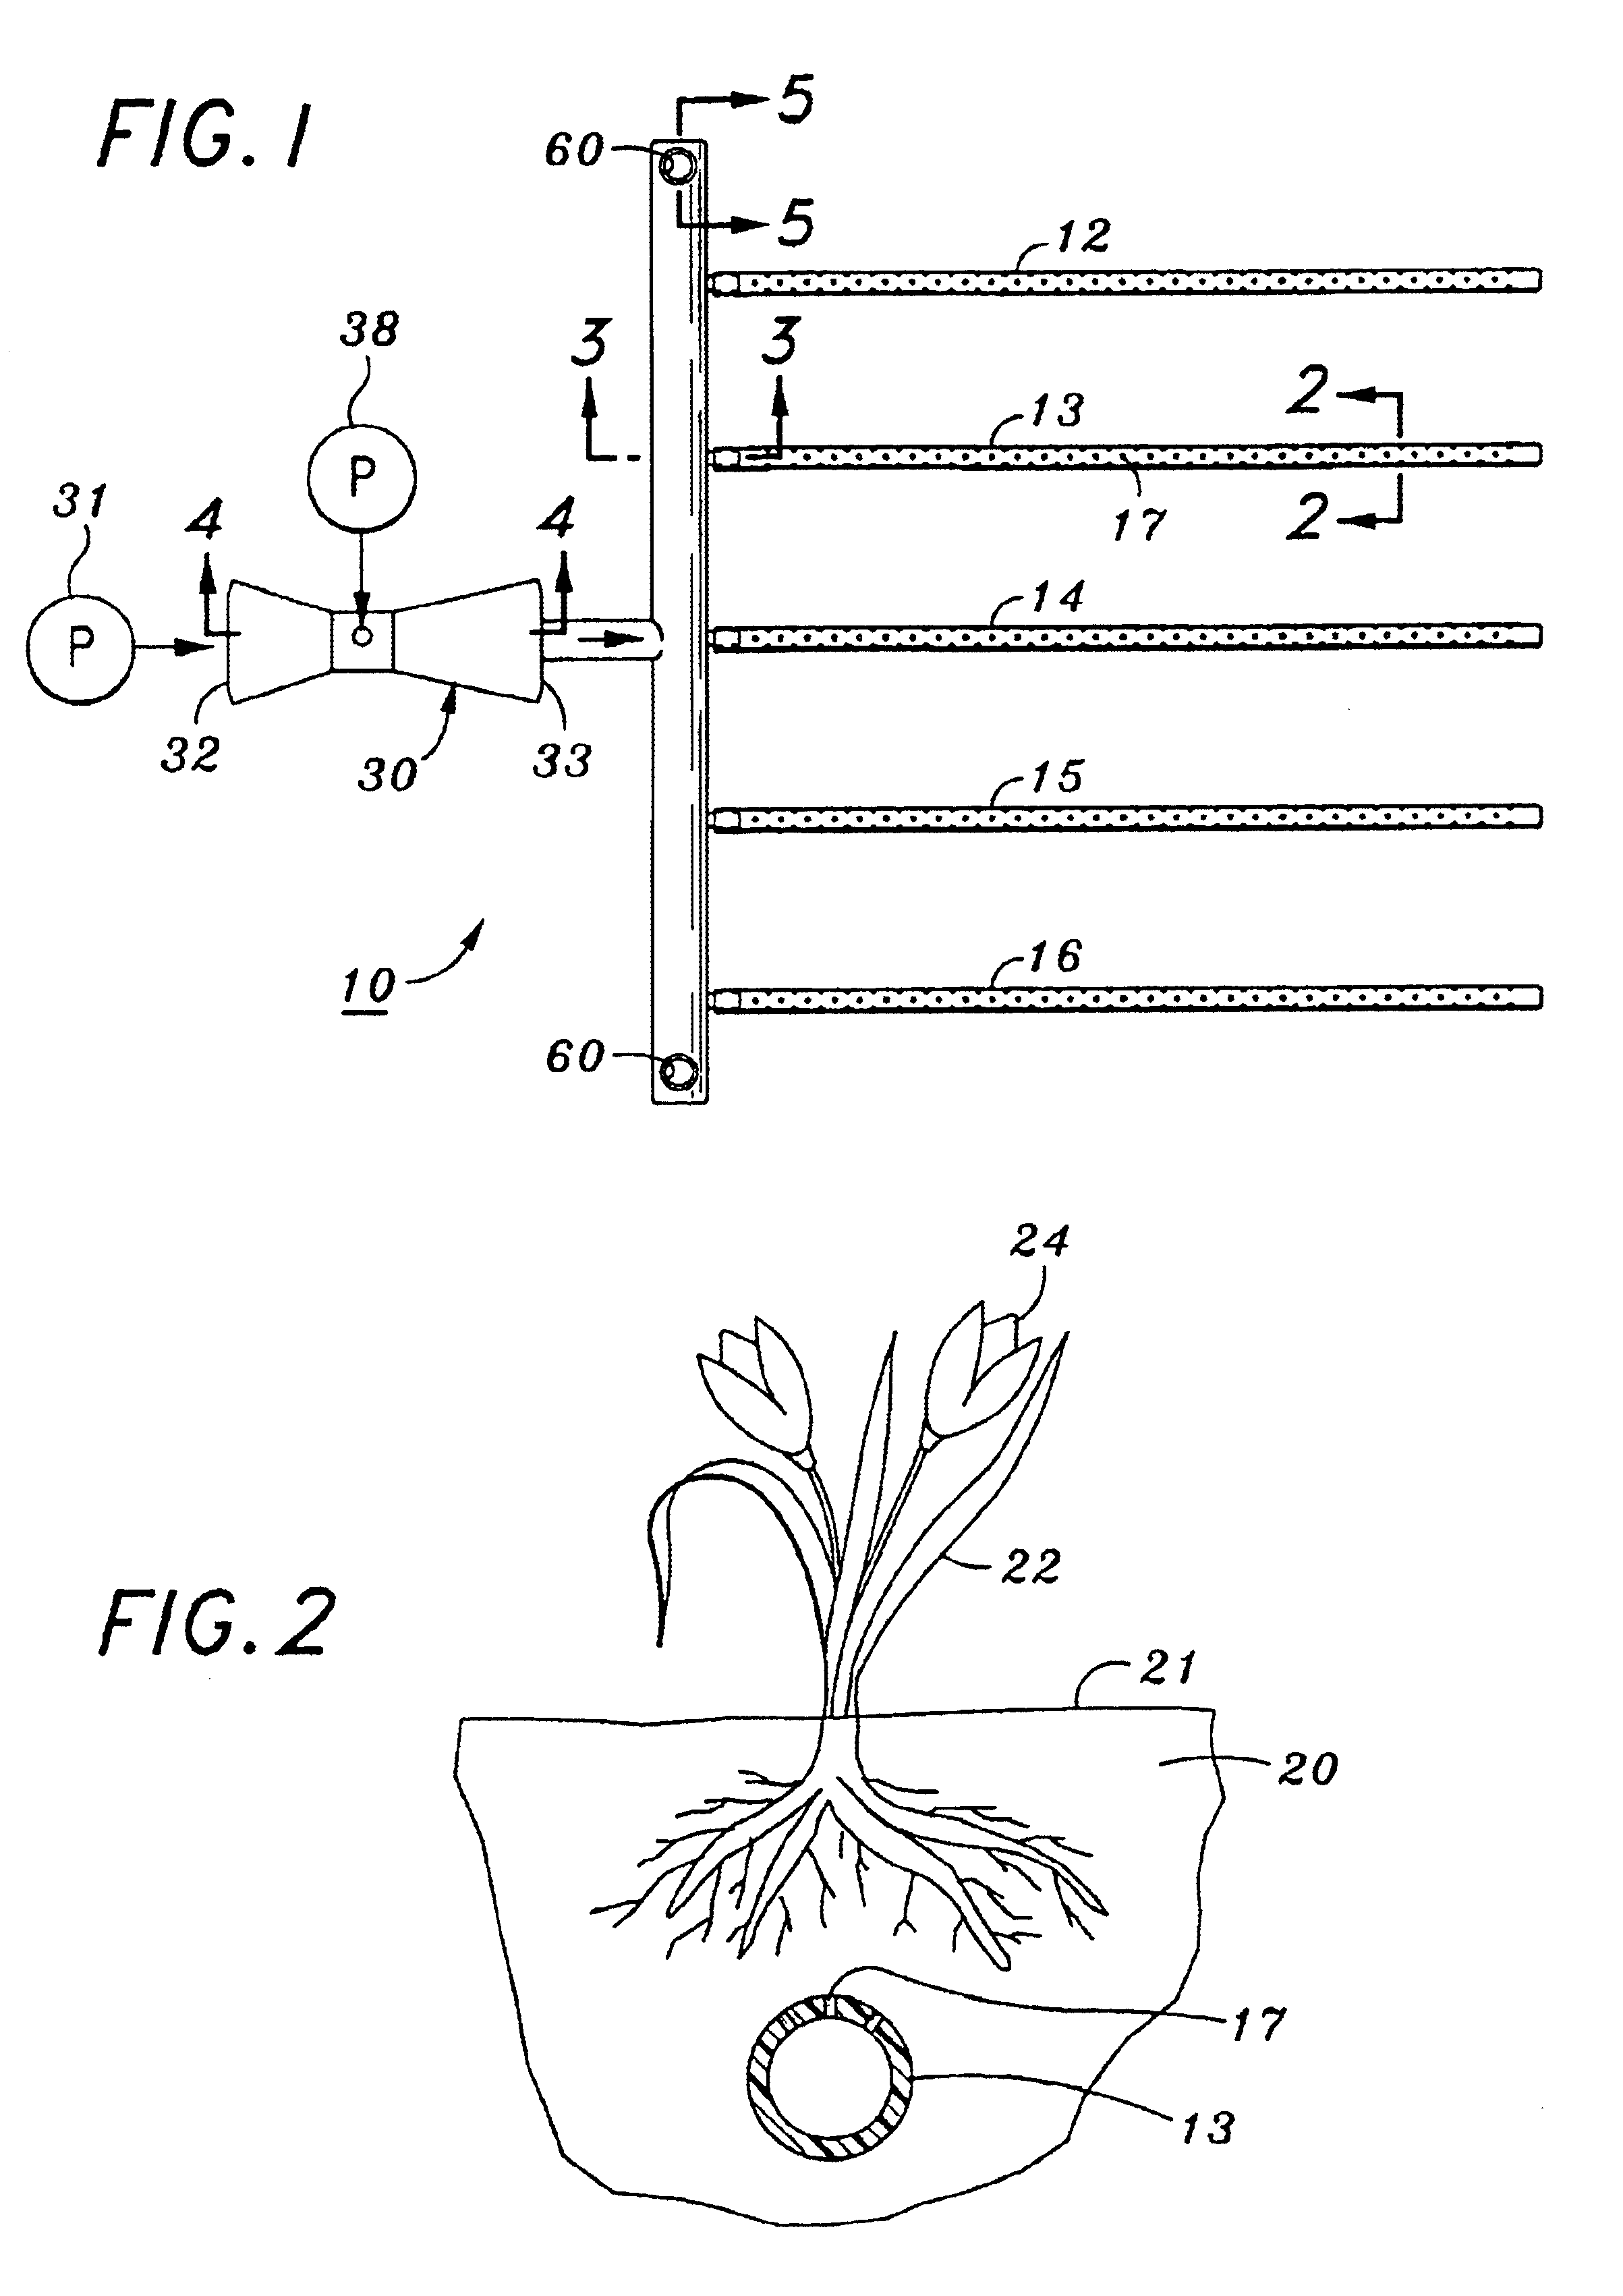 Subsurface water/air irrigation system with prevention of air lock